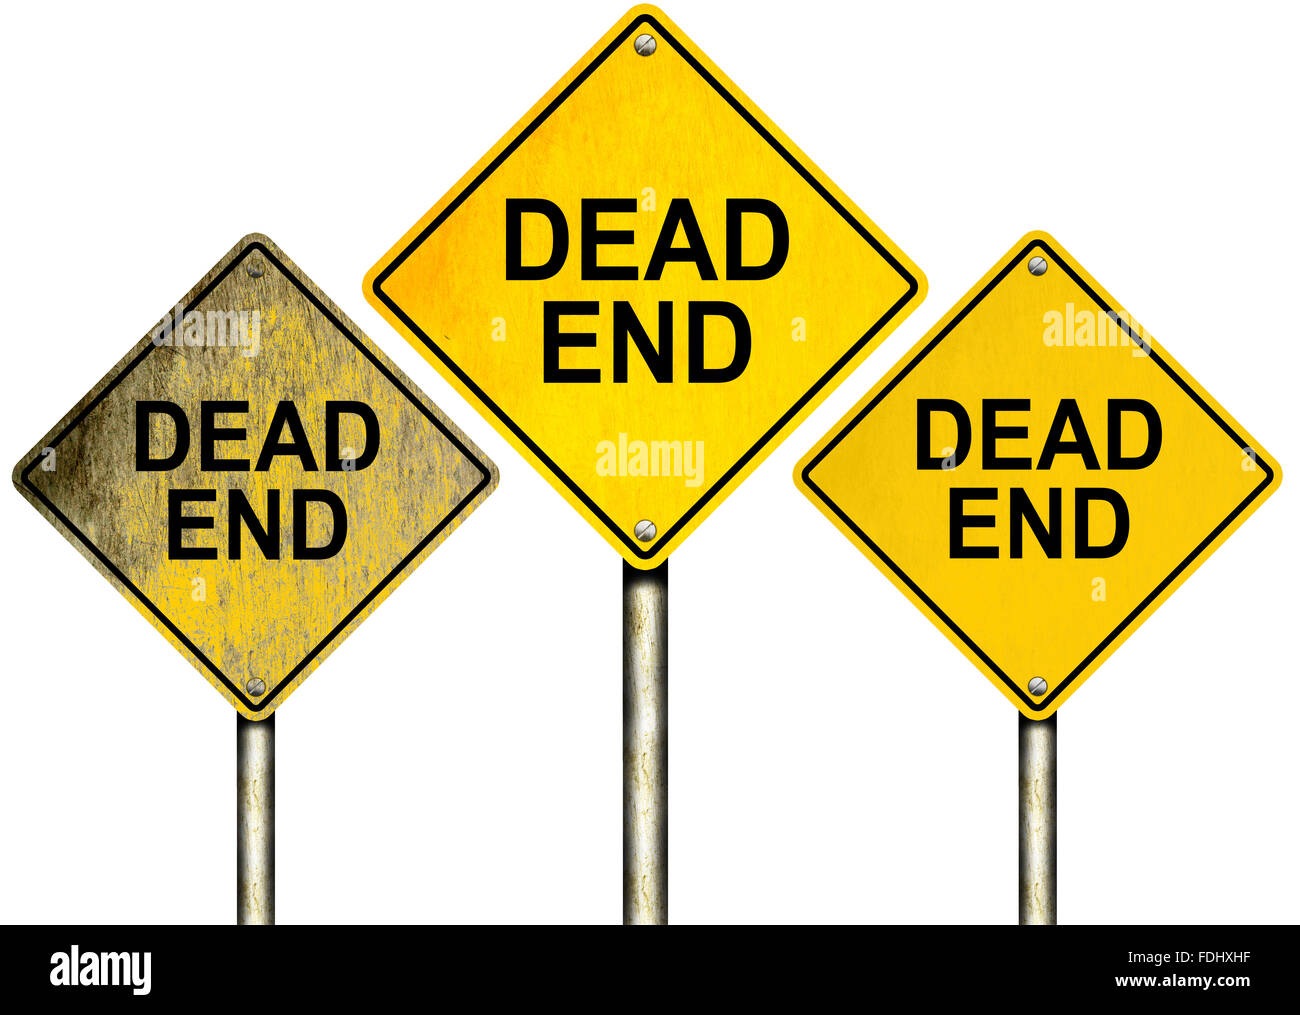 Dead End Road Signs Stock Photo